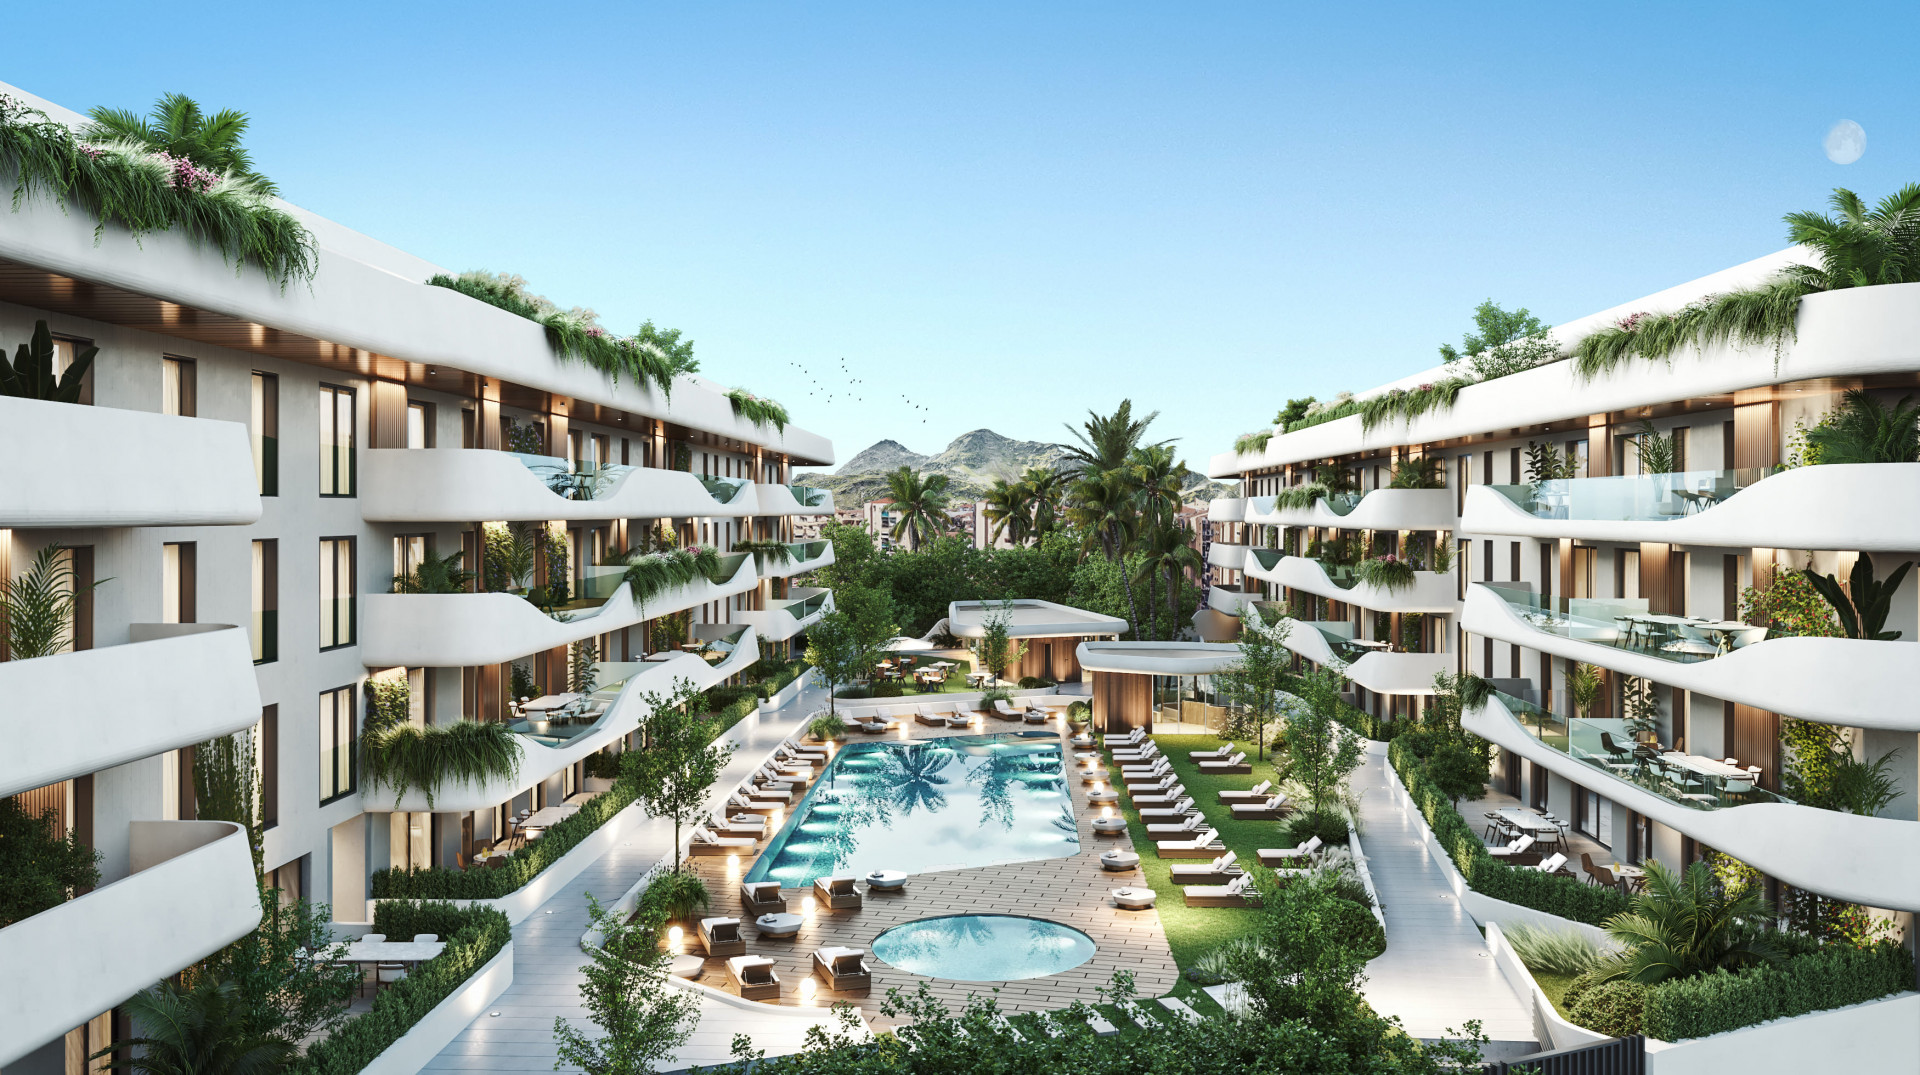 Off-plan beach apartments for sale in San Pedro Playa - Marbella